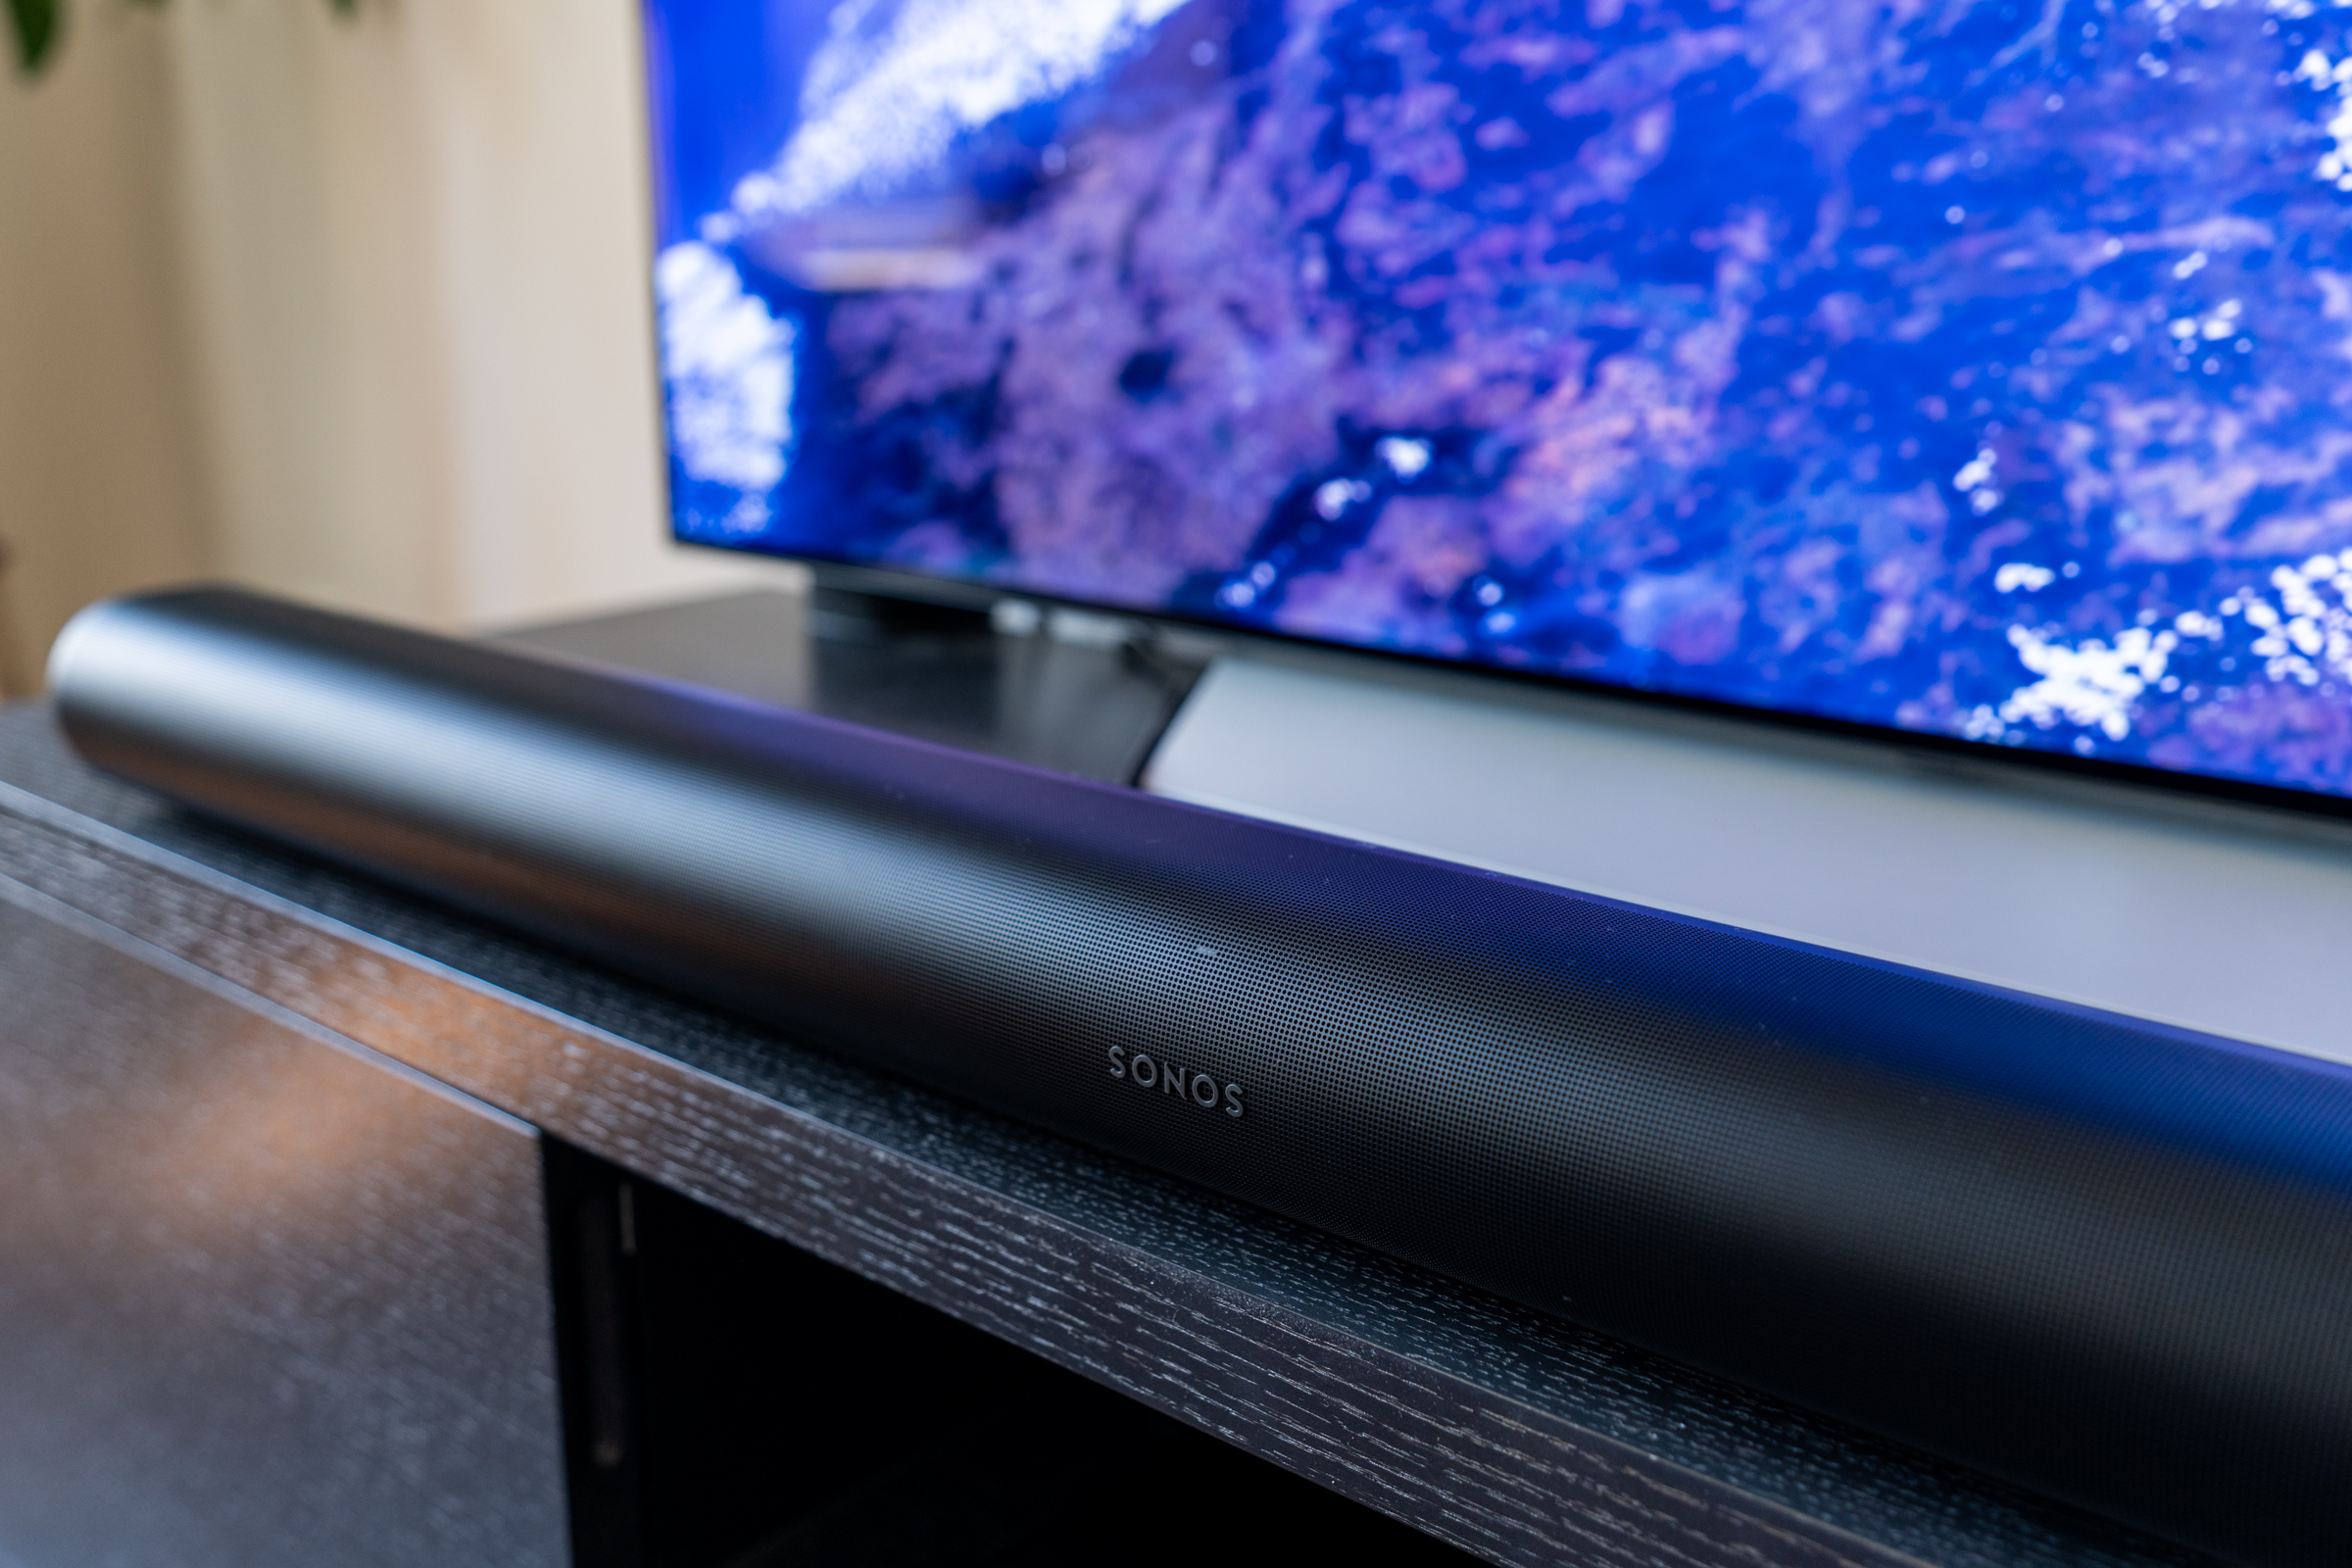 The Sonos Arc is an outstanding soundbar, on its own or with friends TechCrunch